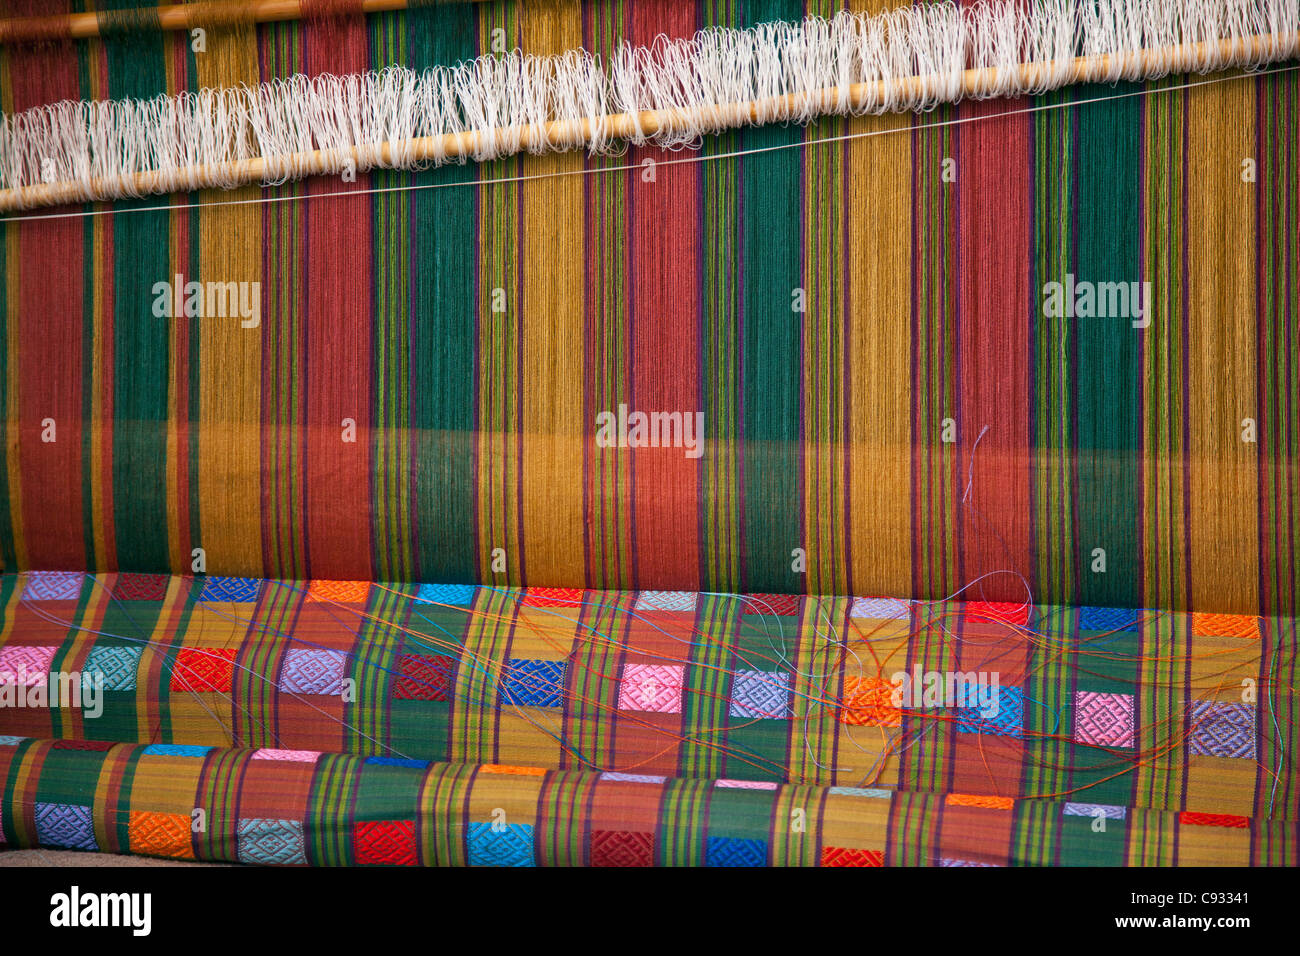 Beautifully patterned silk material being woven on a traditional wooden loom. Stock Photo